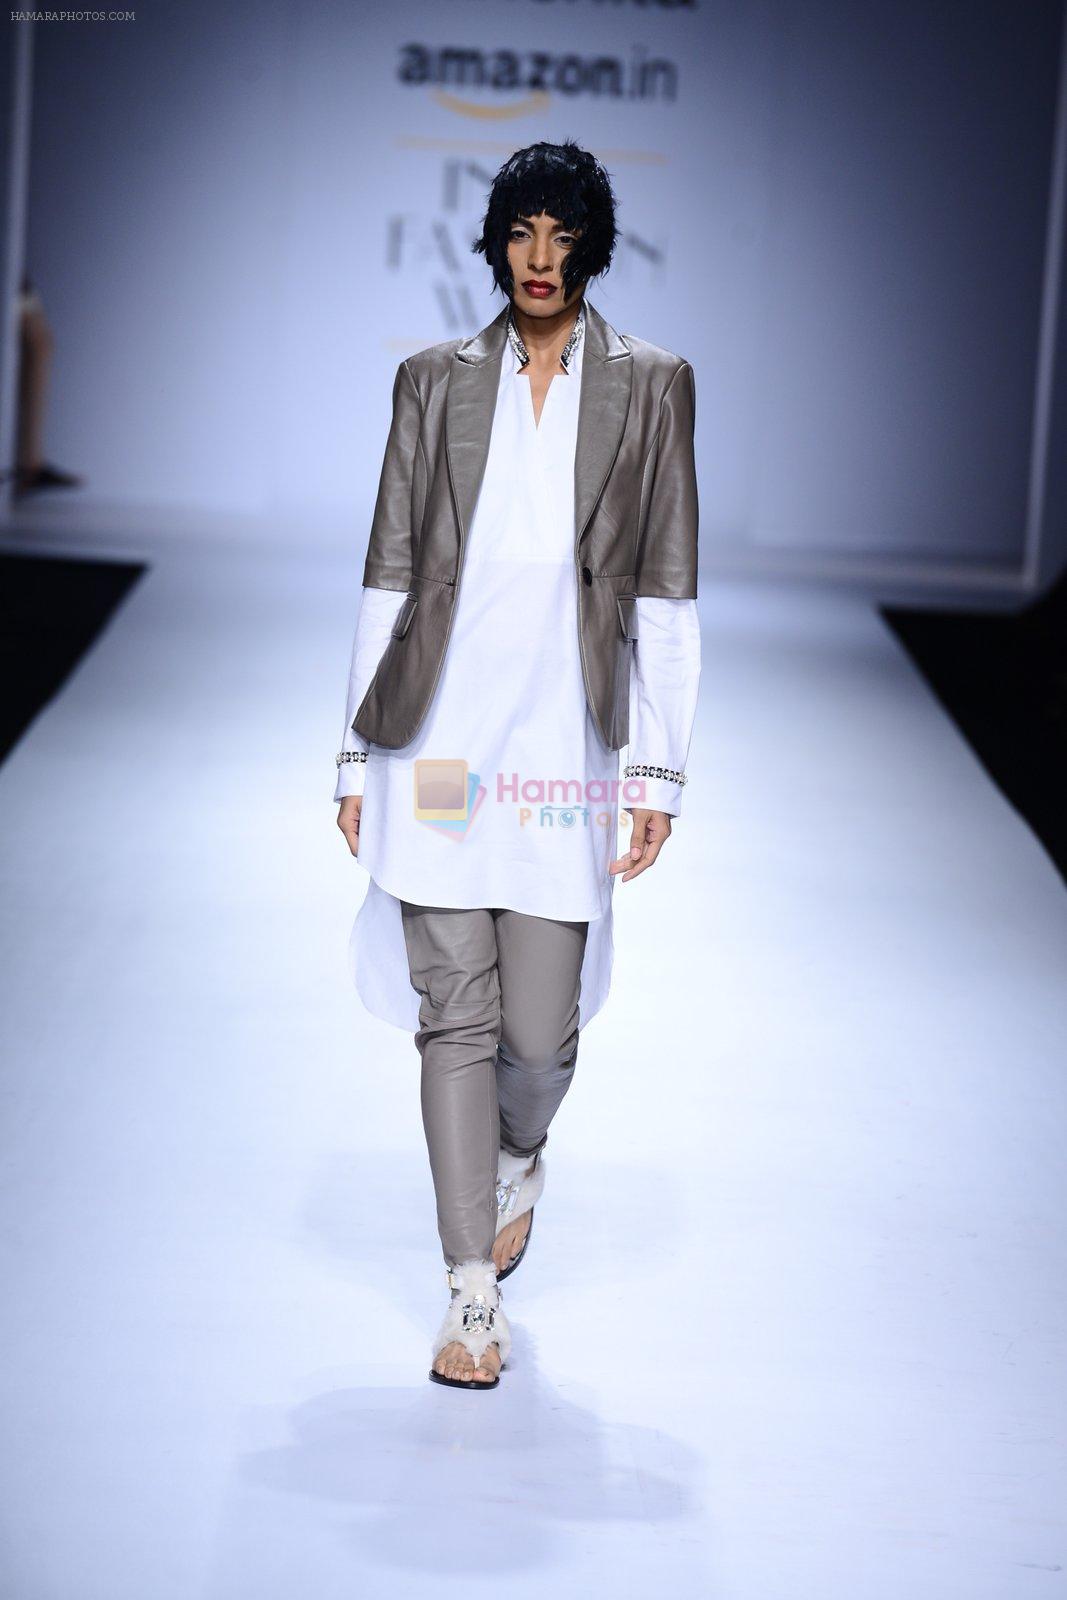 Model walk the ramp for Sanchita on day 3 of Amazon India Fashion Week on 27th March 2015